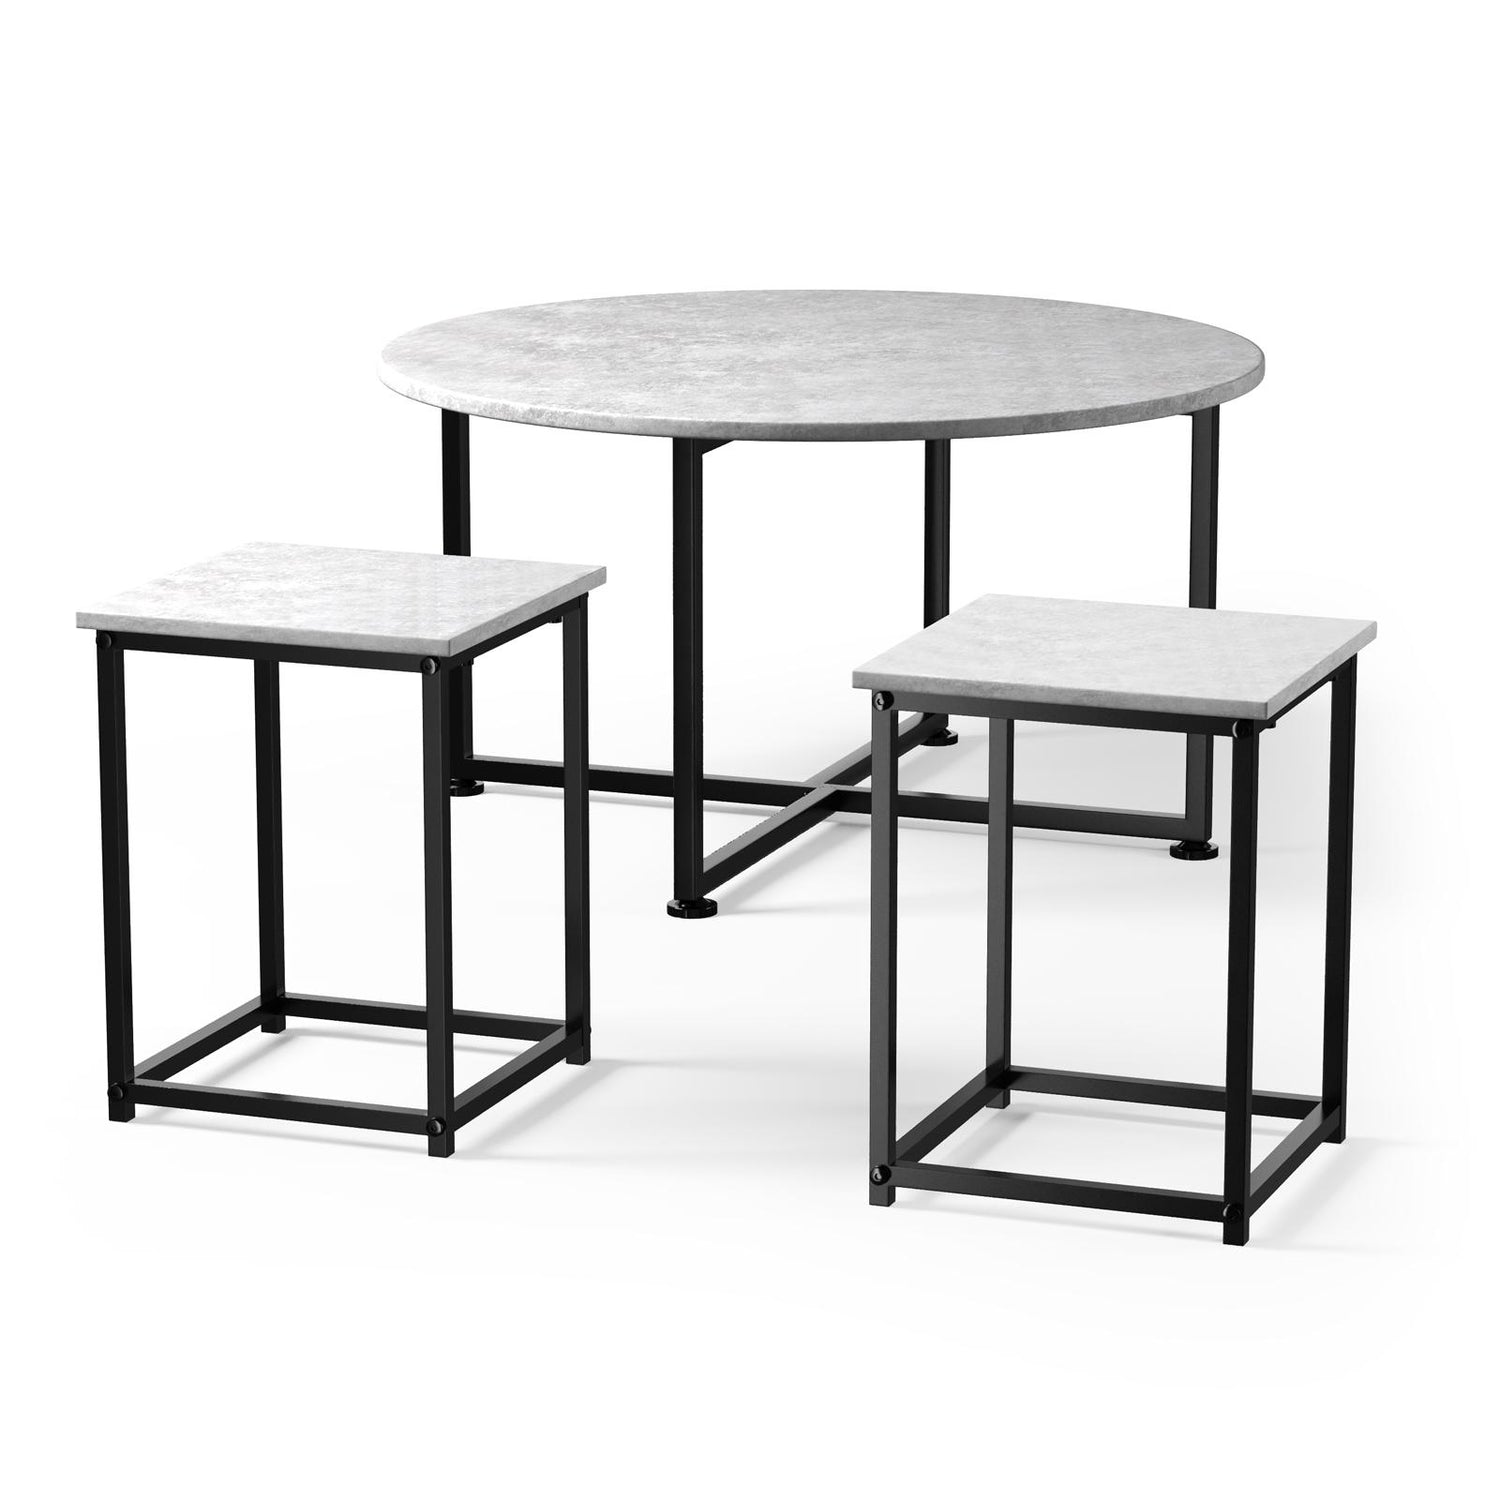 Tables/Chairs